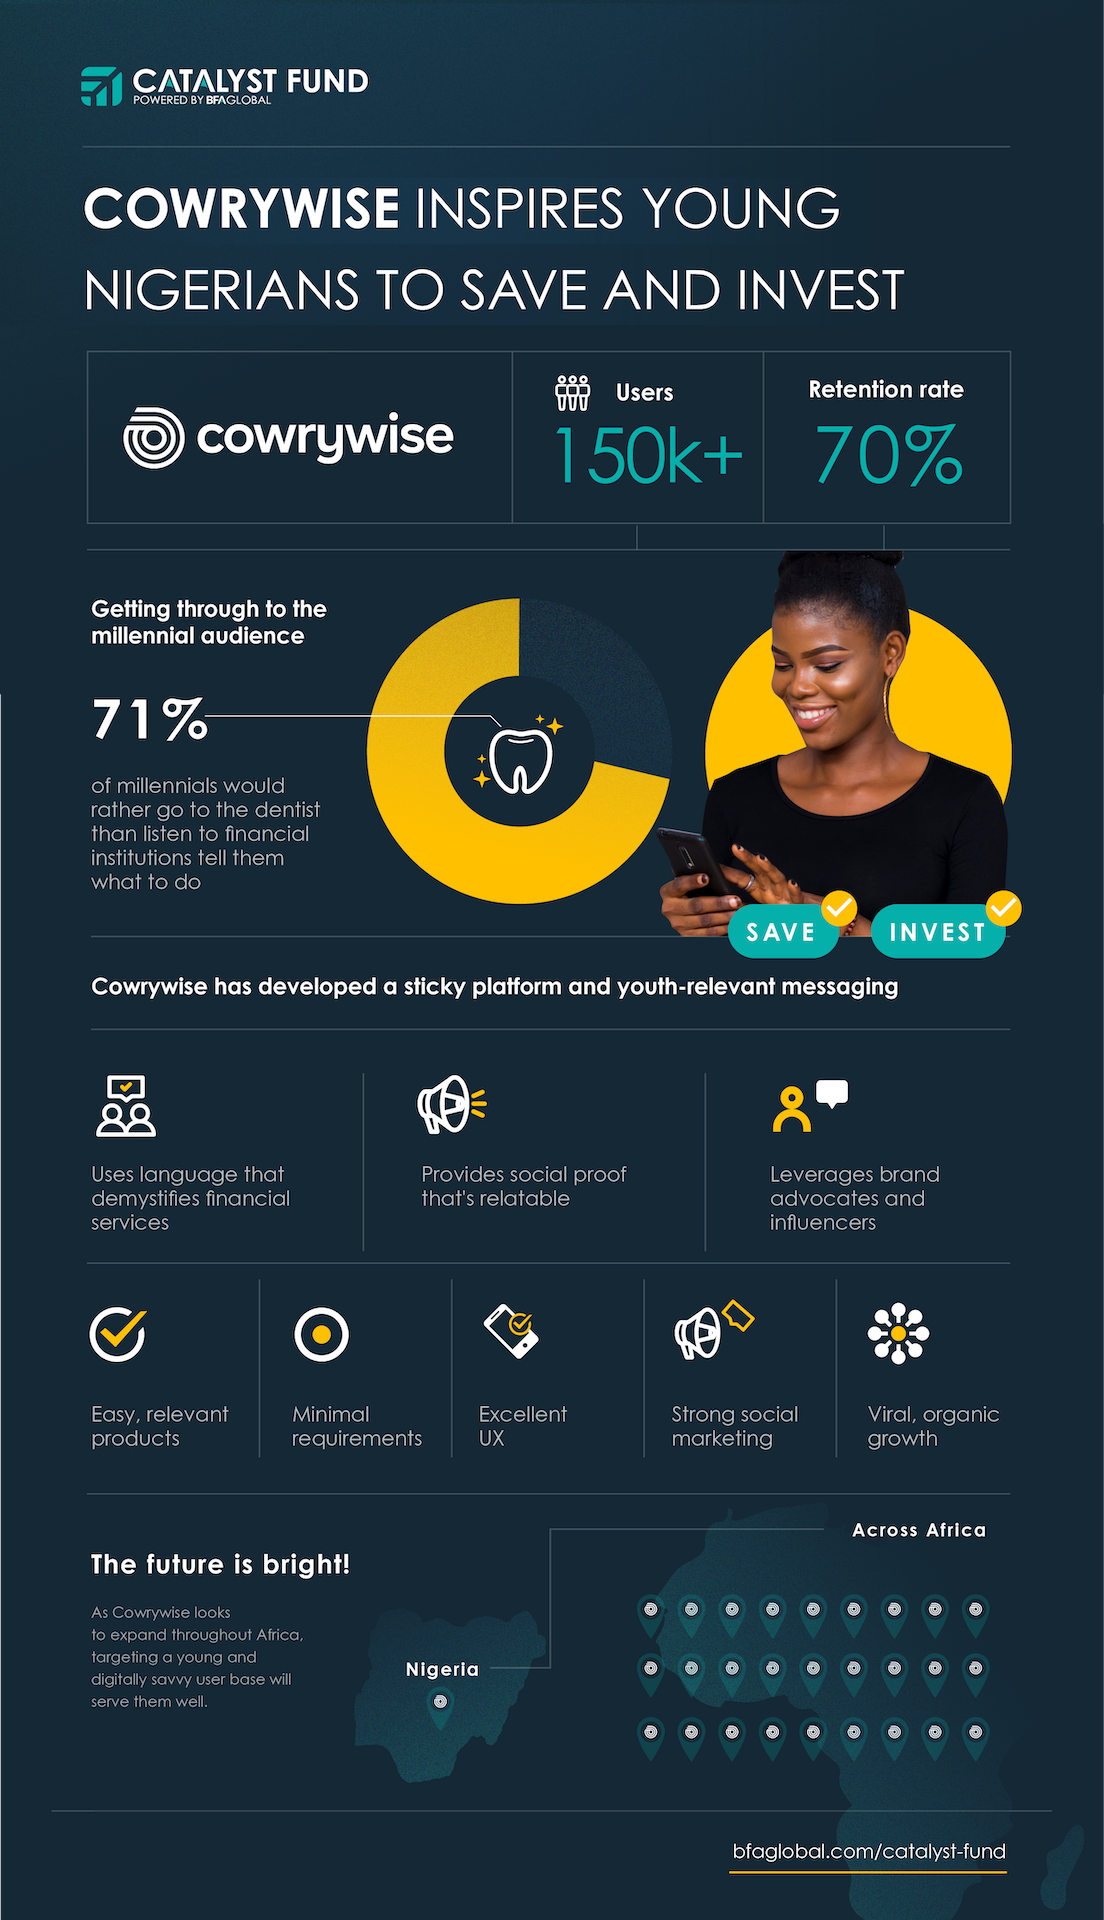 Cowrywise Inspires Young Nigerians